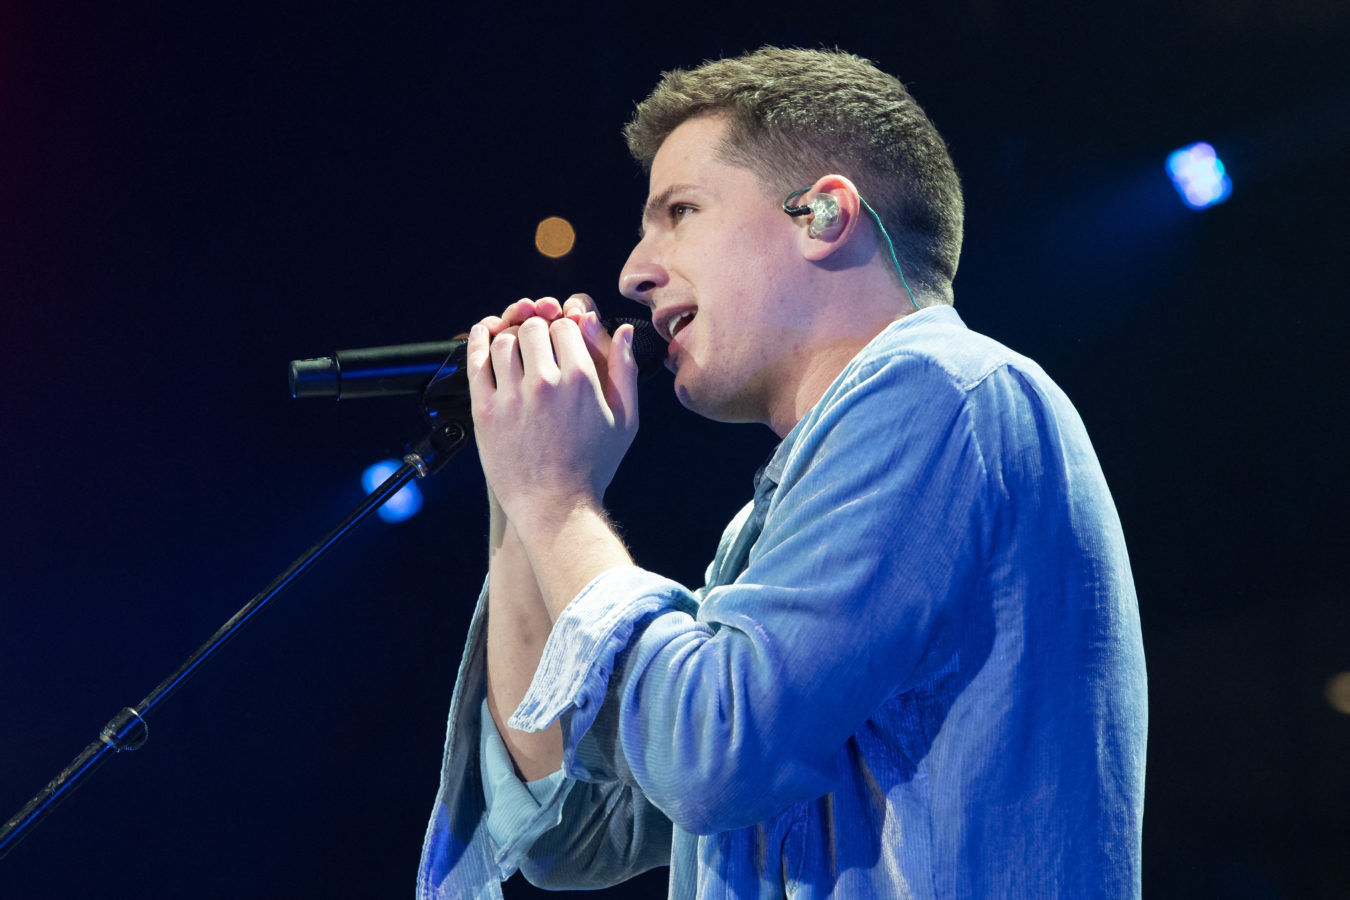 Charlie Puth is performing in a virtual concert on TikTok to ring in 2022